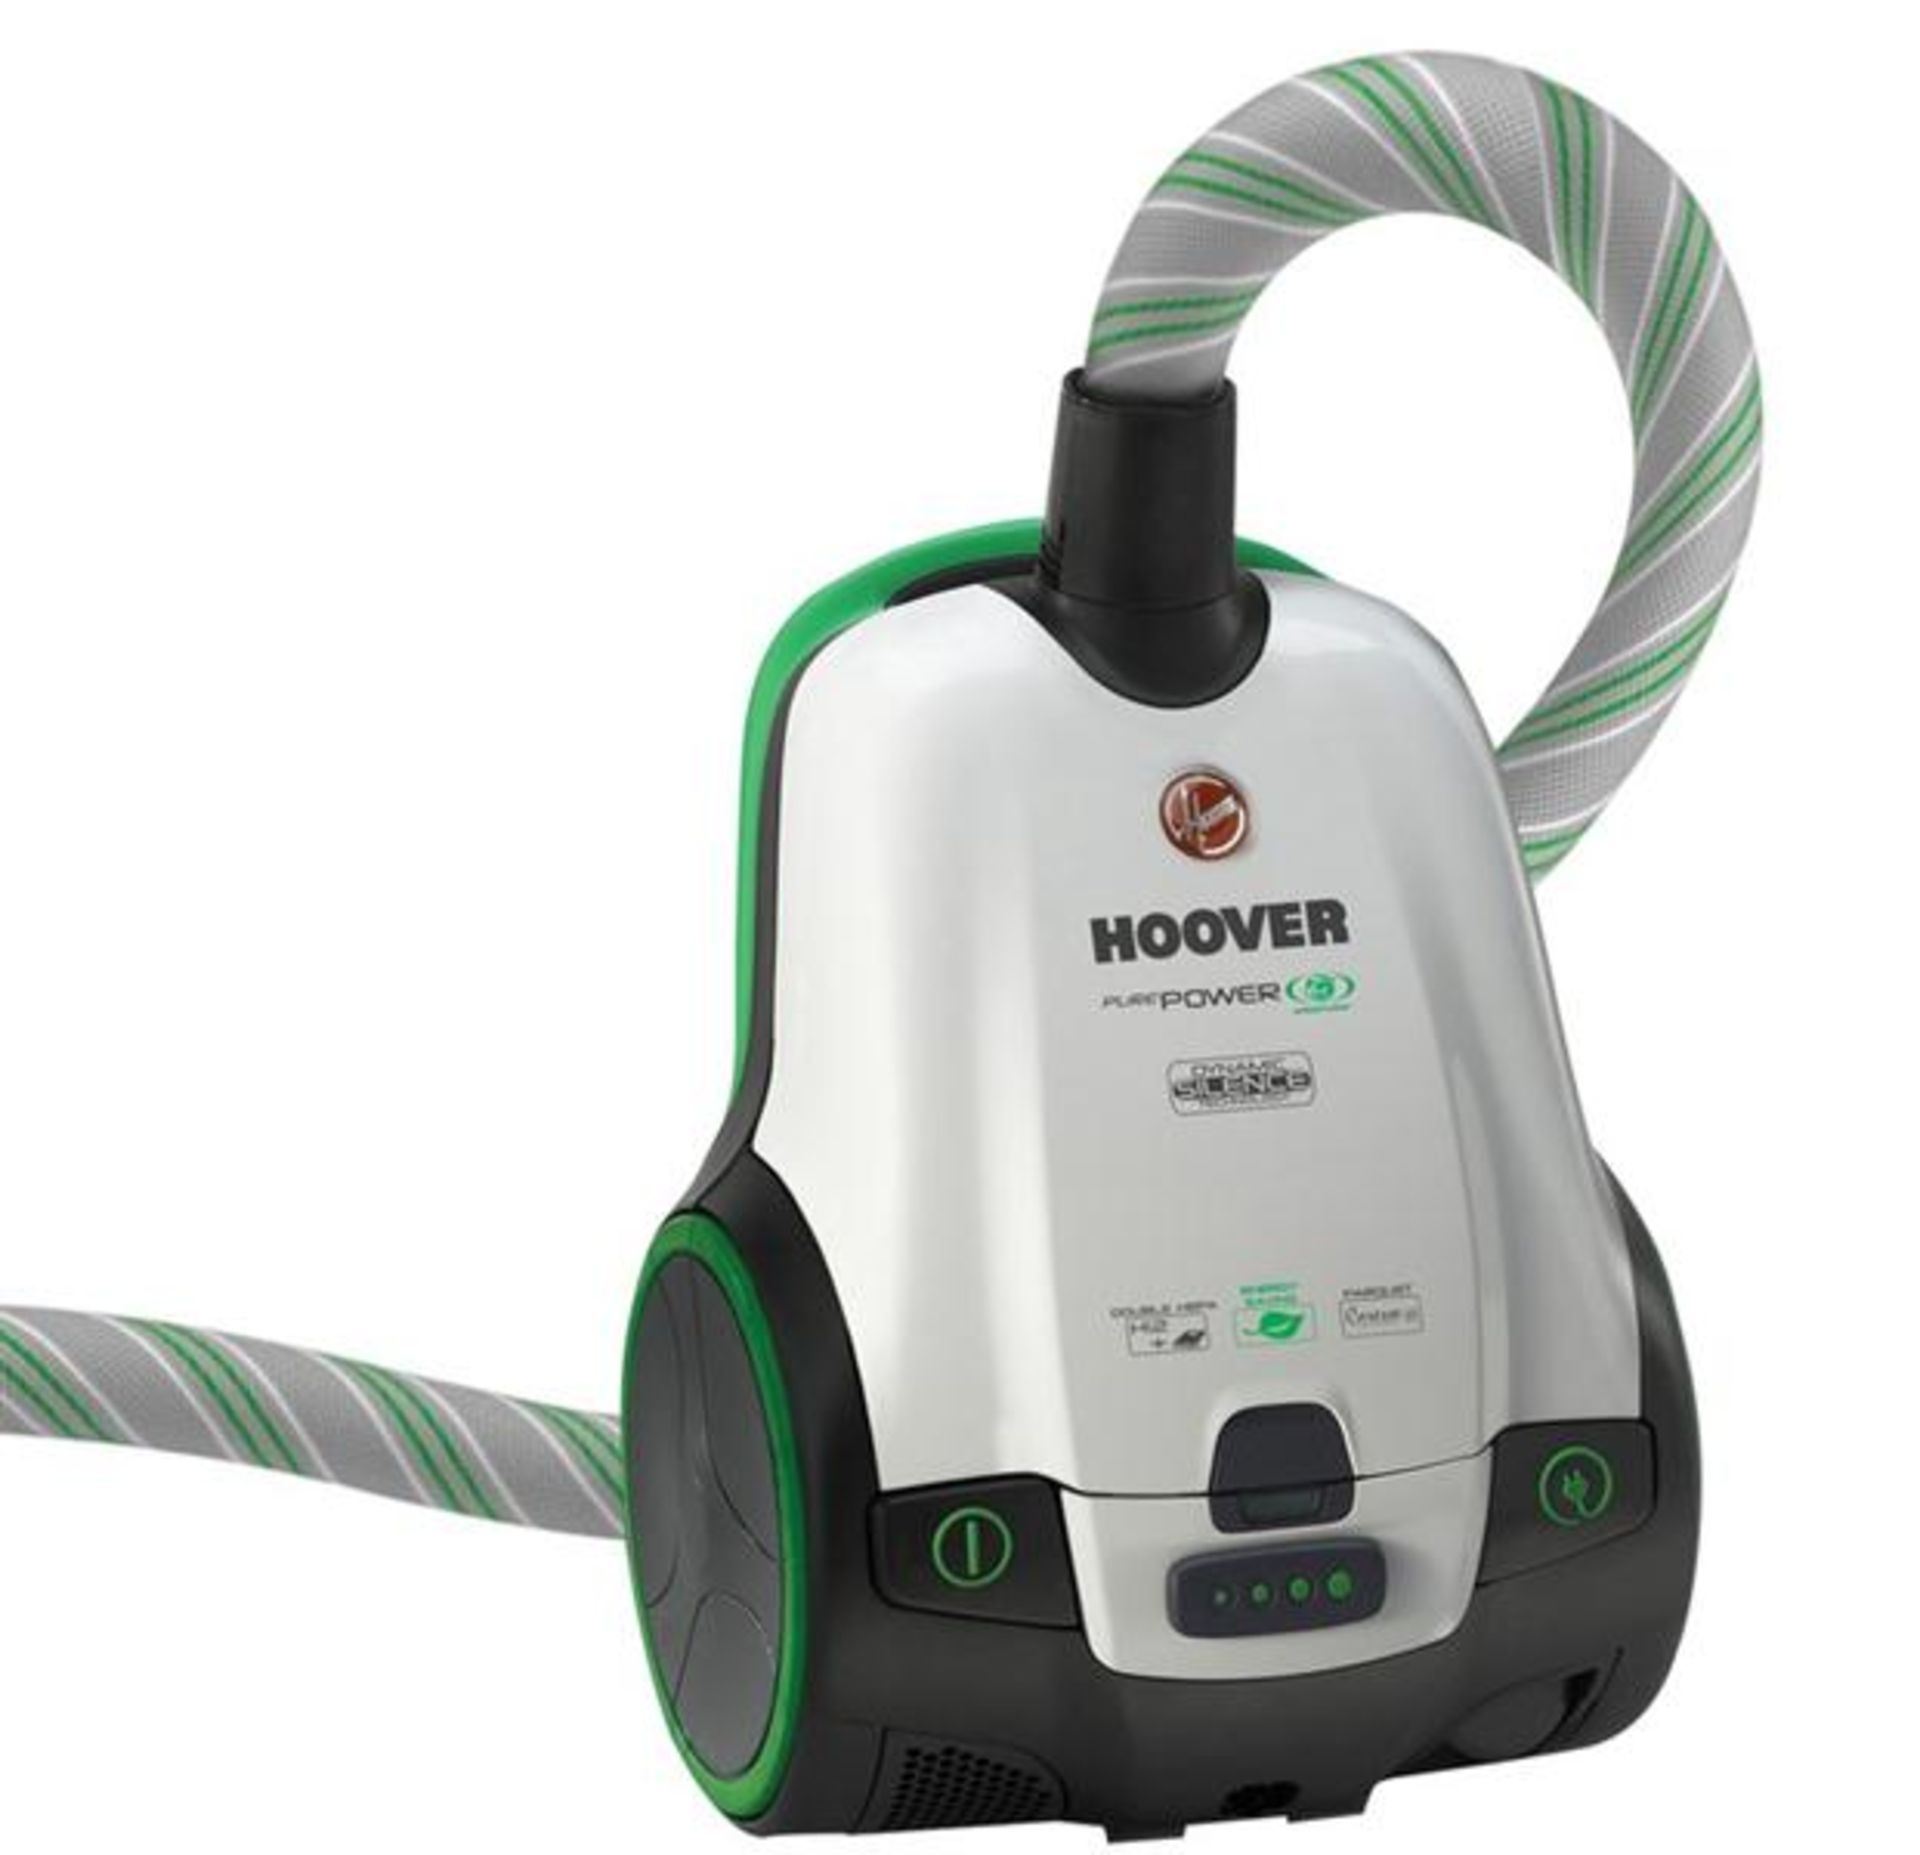 V  Grade A Pure Power Hoover With 9 Metre Working Radius & 3-In-1 Tool (Continental Plug)